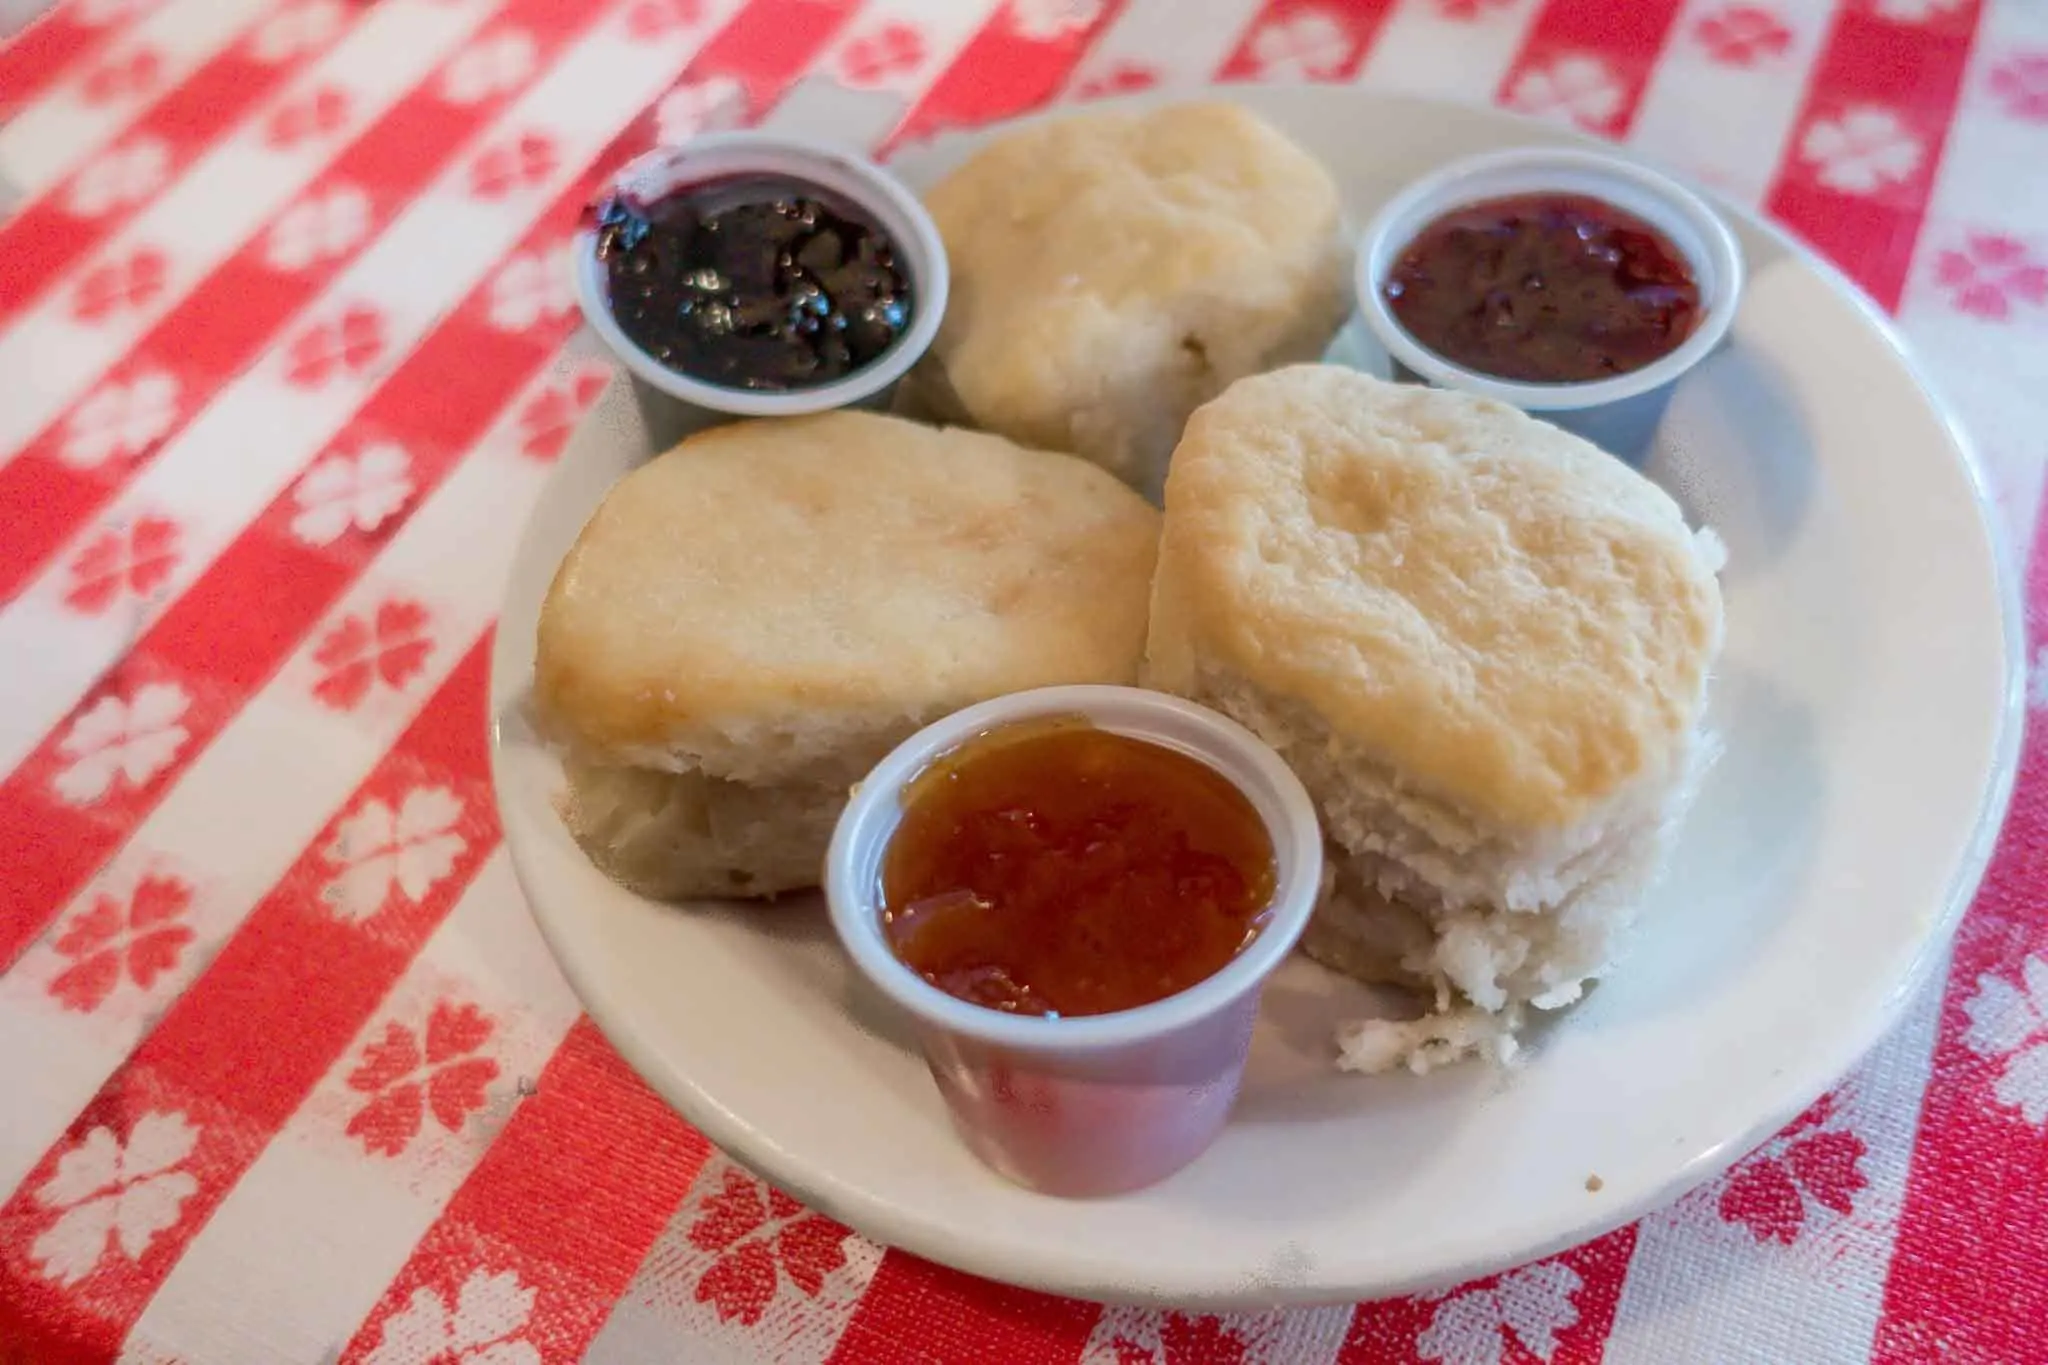 Biscuits on a plate with three kinds of preserves